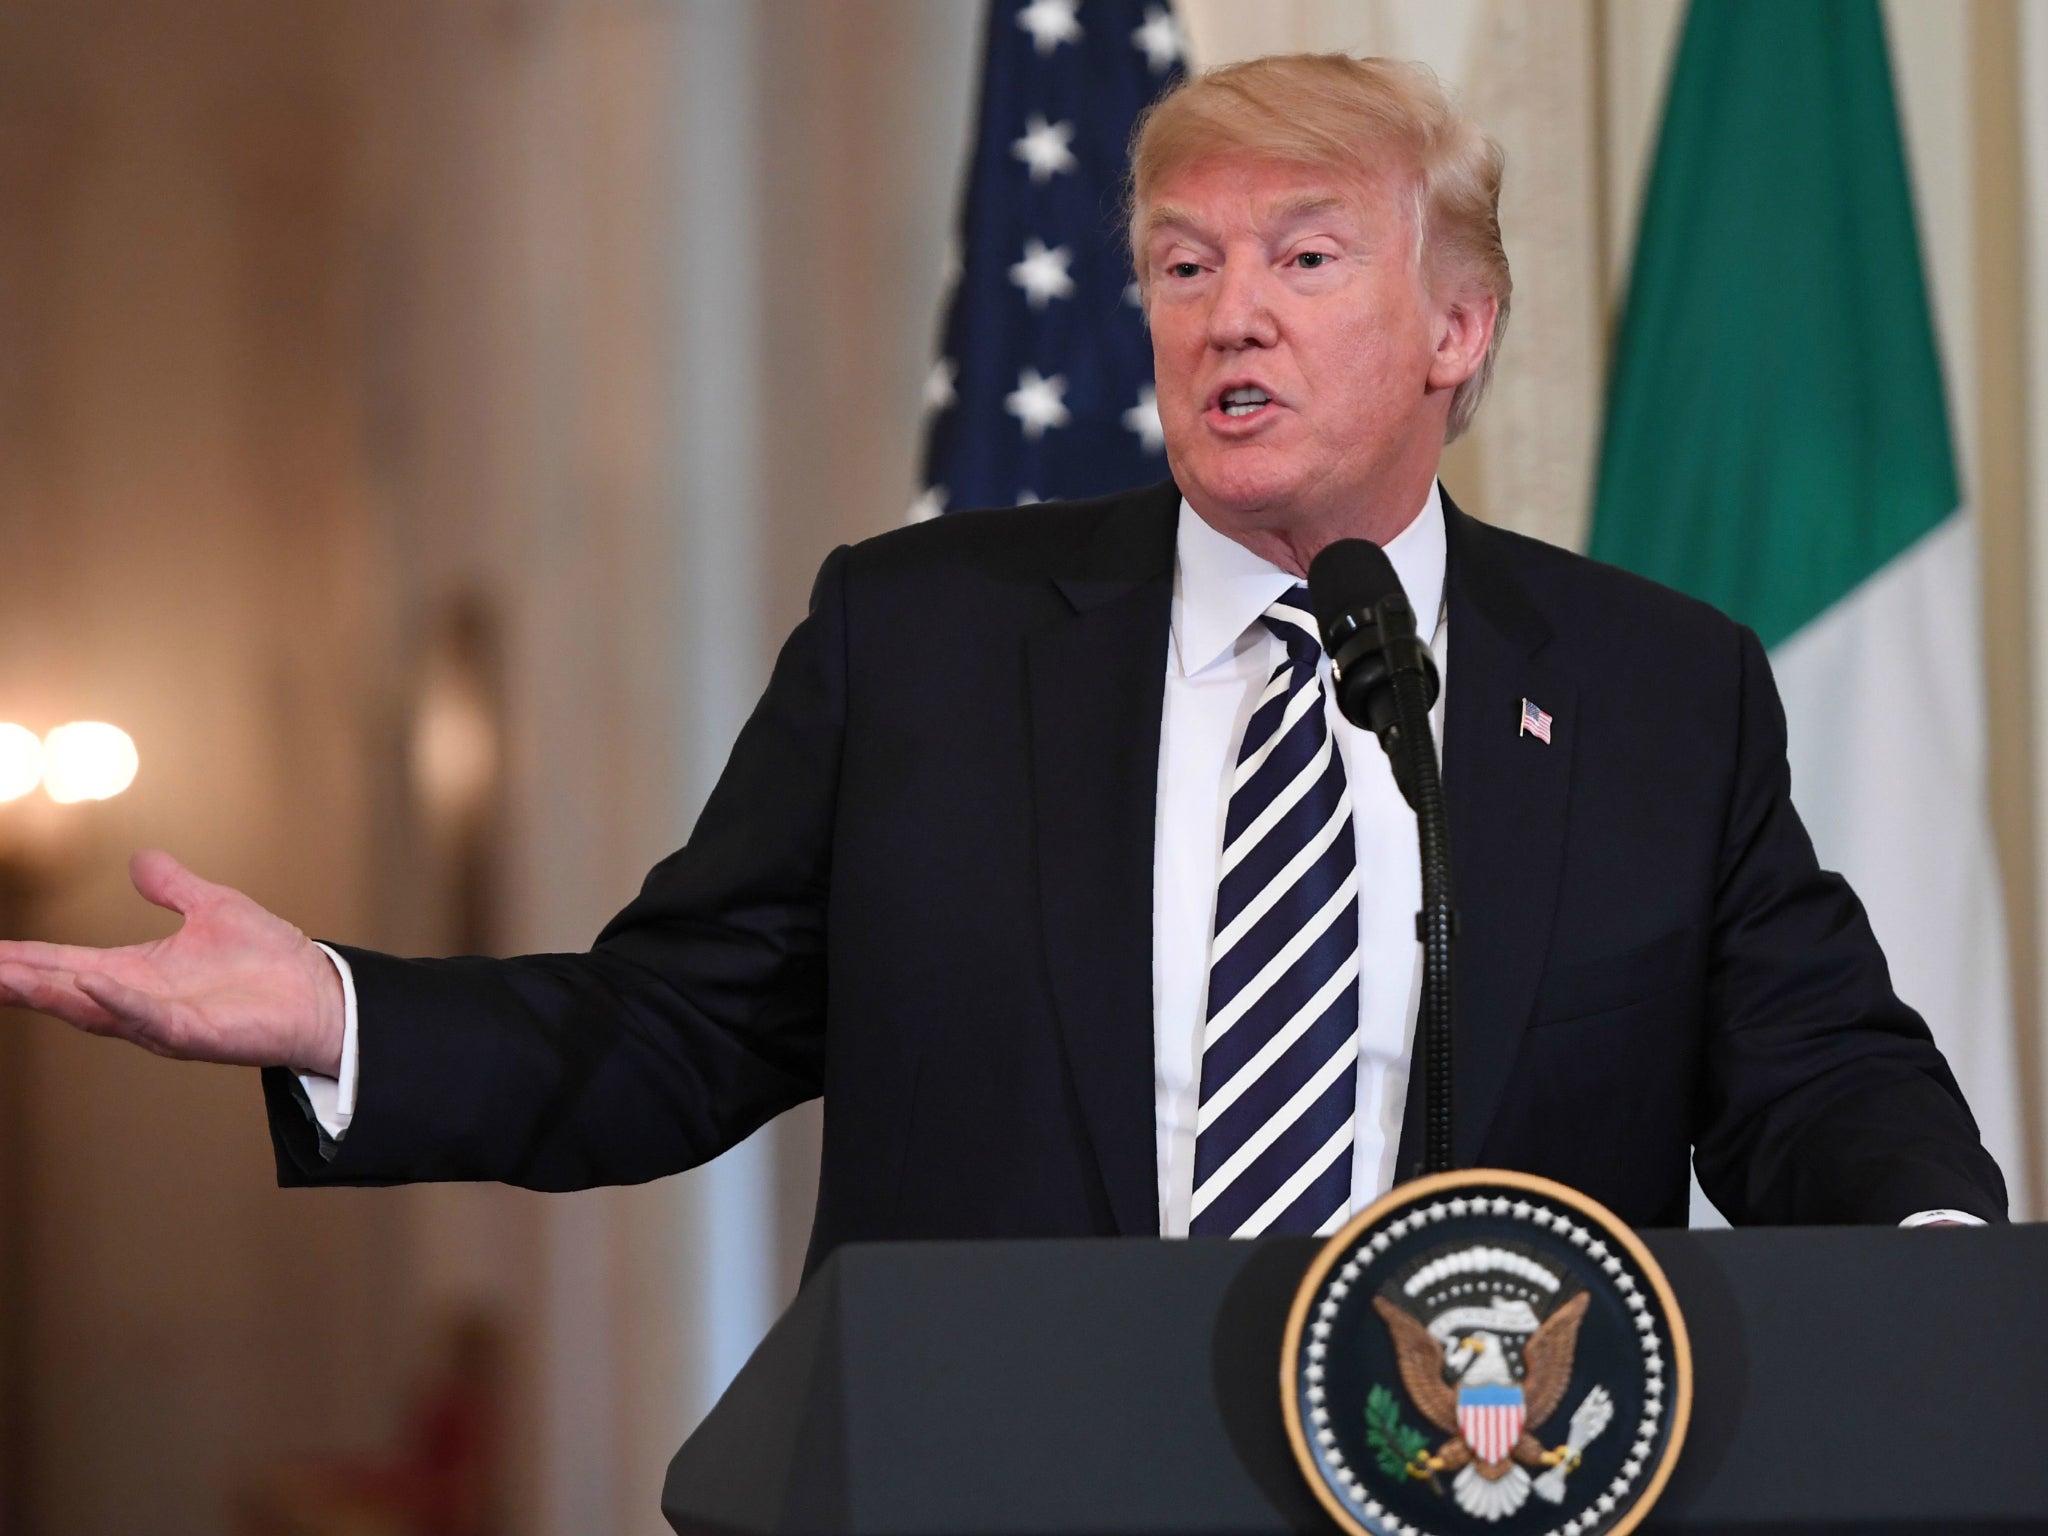 US President Donald Trump doubles down on his threat to shut down the government over funding for his border wall with Mexico during a joint press conference with Italian Prime Minister Giuseppe Conte.